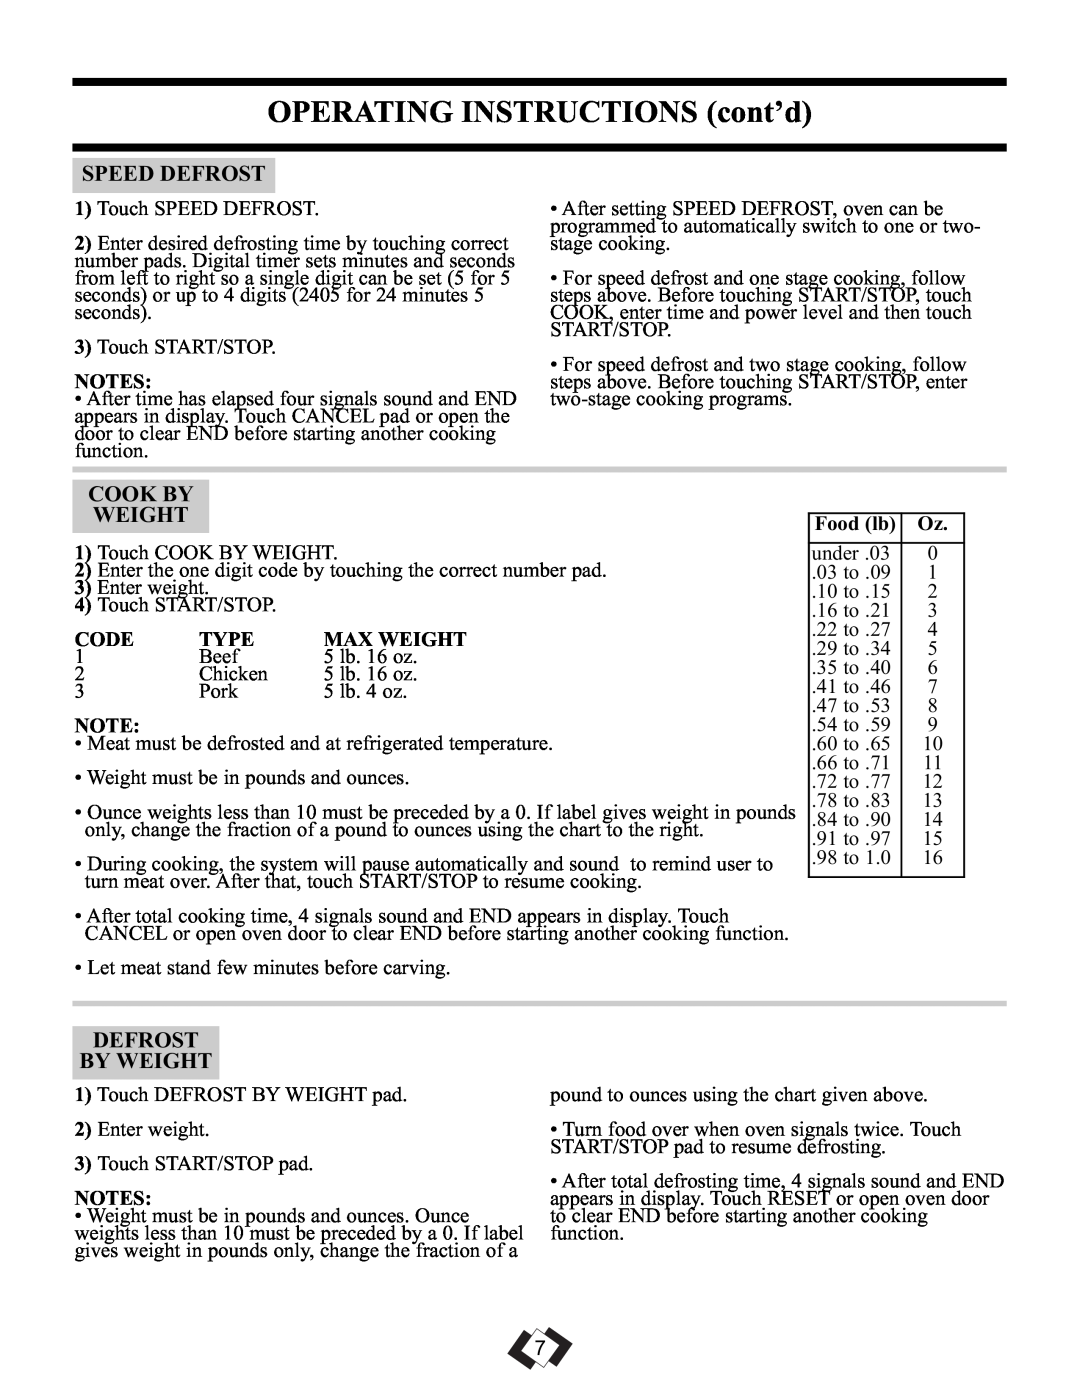 Sunbeam SBMW1109W/BL operating instructions OPERATING INSTRUCTIONS cont’d, Speed Defrost, Cook By Weight, Defrost By Weight 